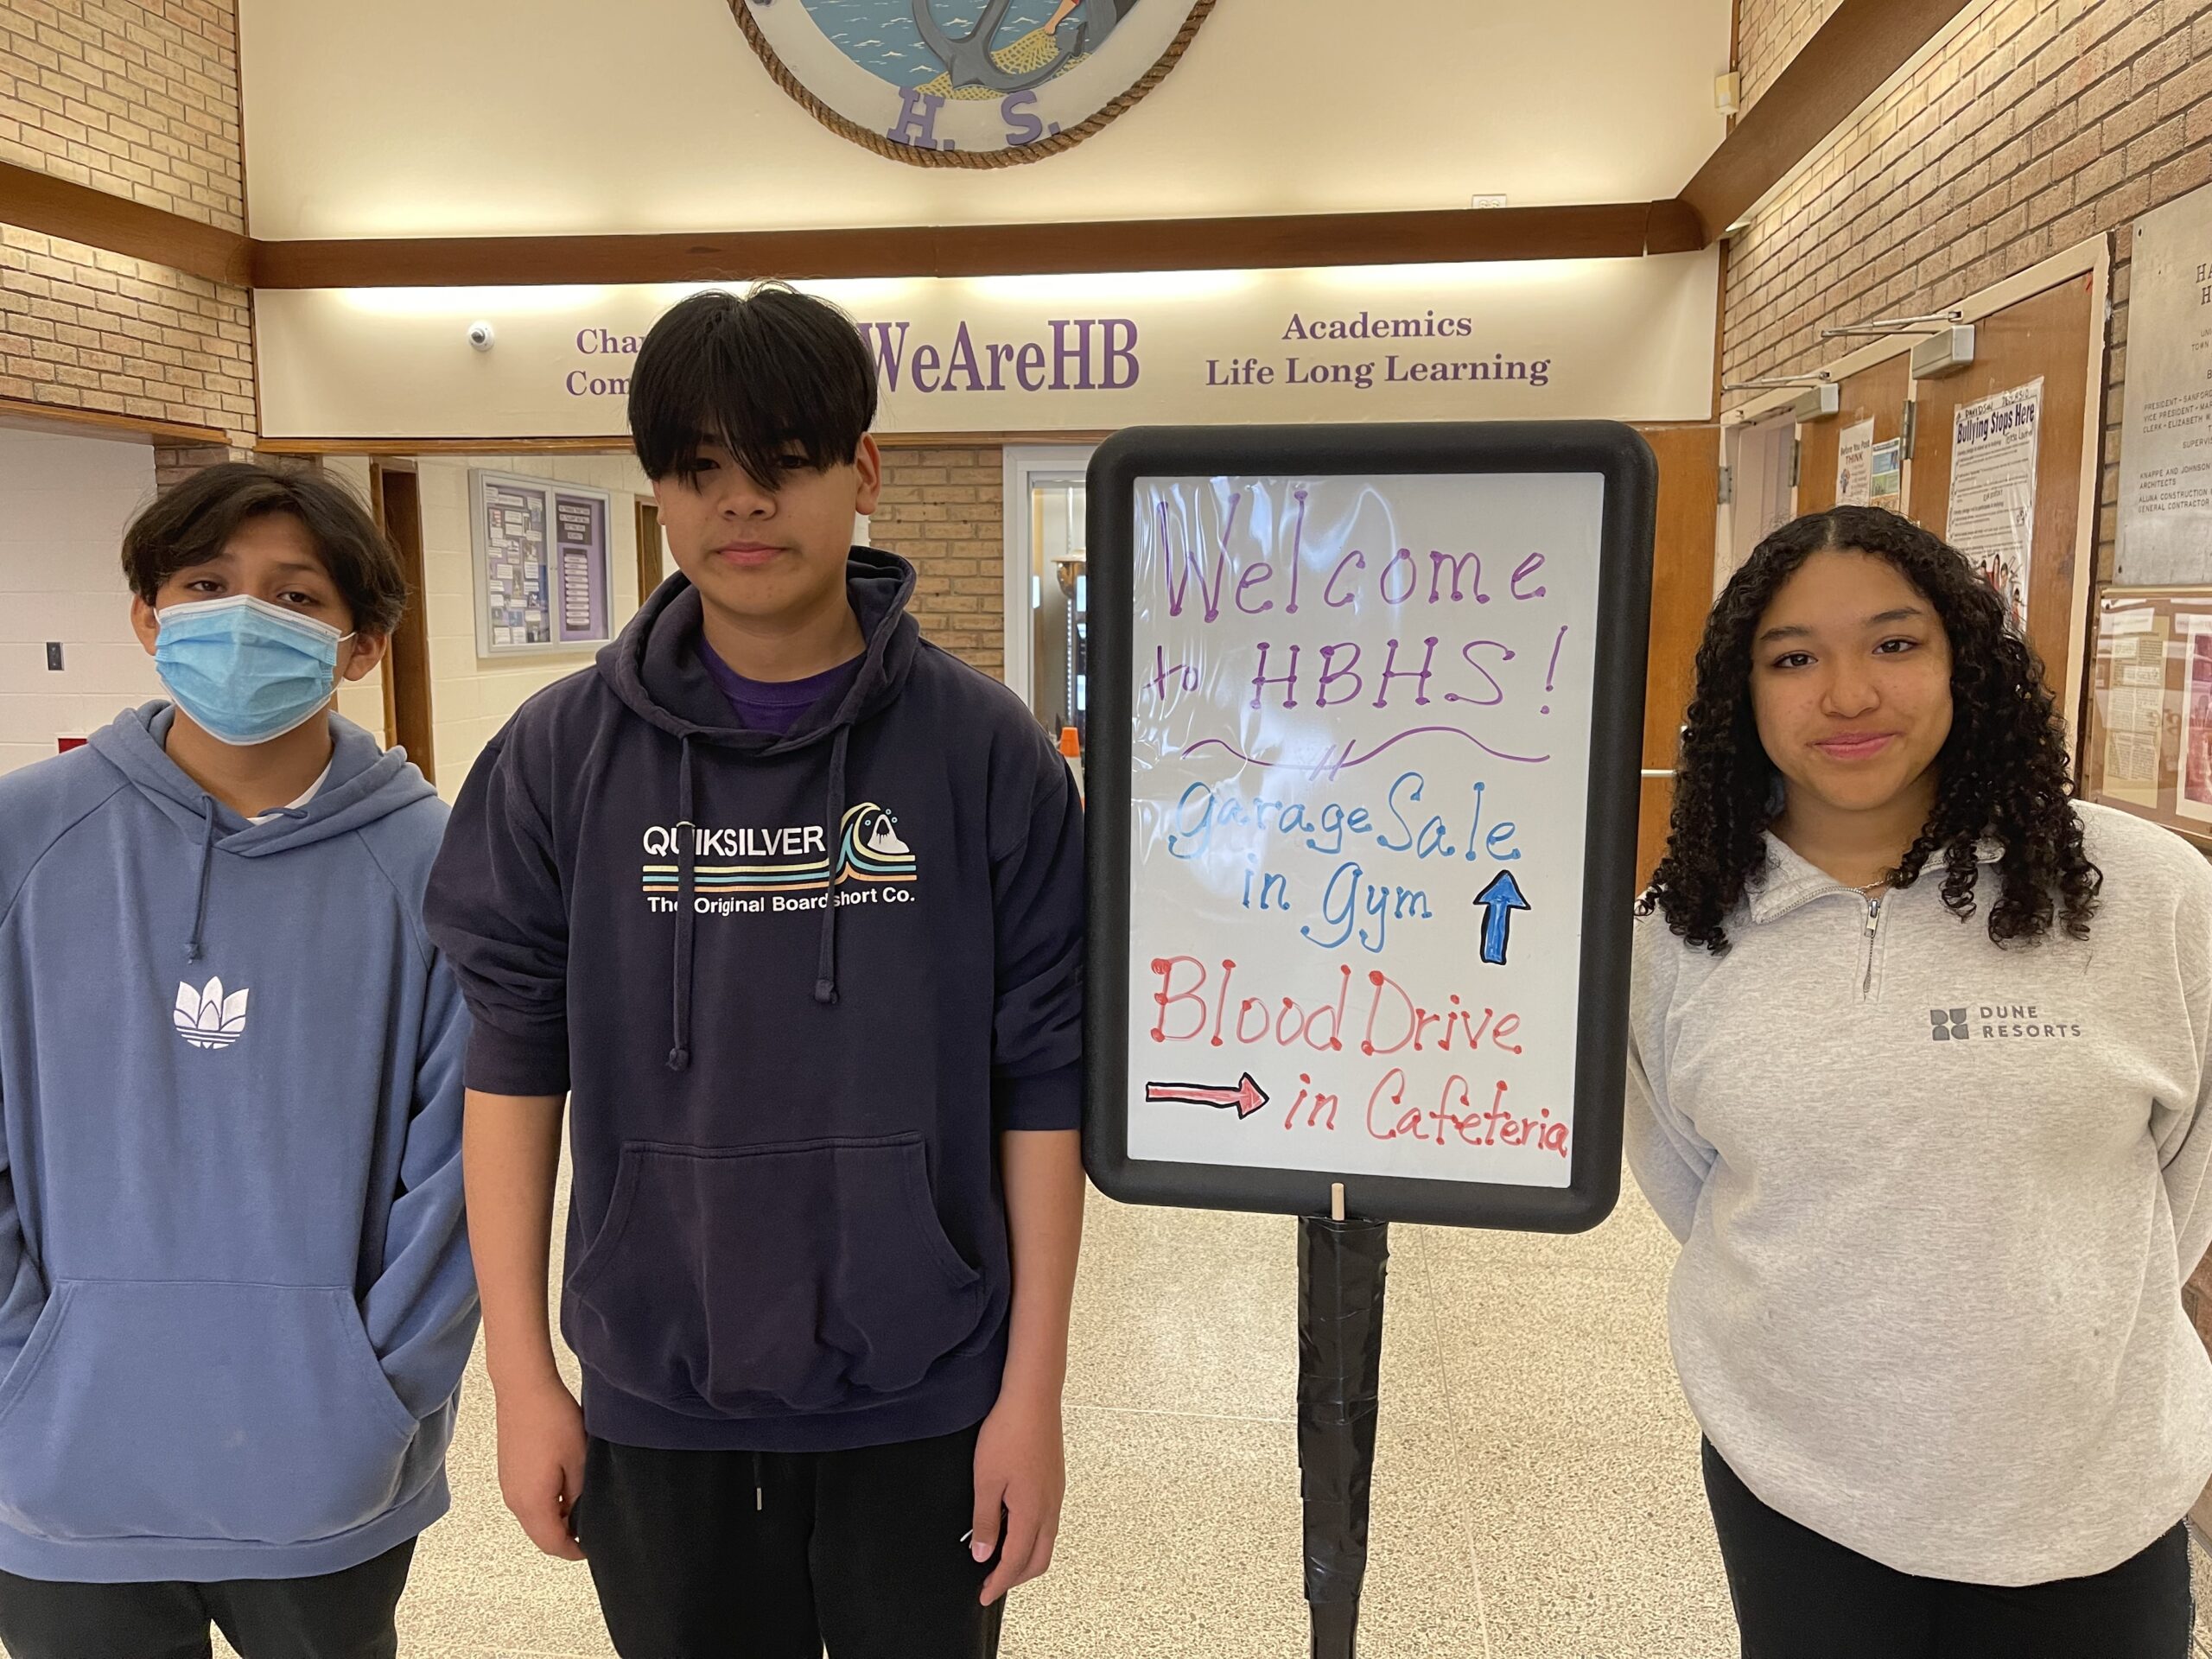 The Hampton Bays High School Key Club hosted a successful blood drive on April 9. During the event, Key Club members helped to direct donors and escort them to the canteen table. In total, 44 pints of blood were collected. COURTESY HAMPTON BAYS SCHOOL DISTRICT